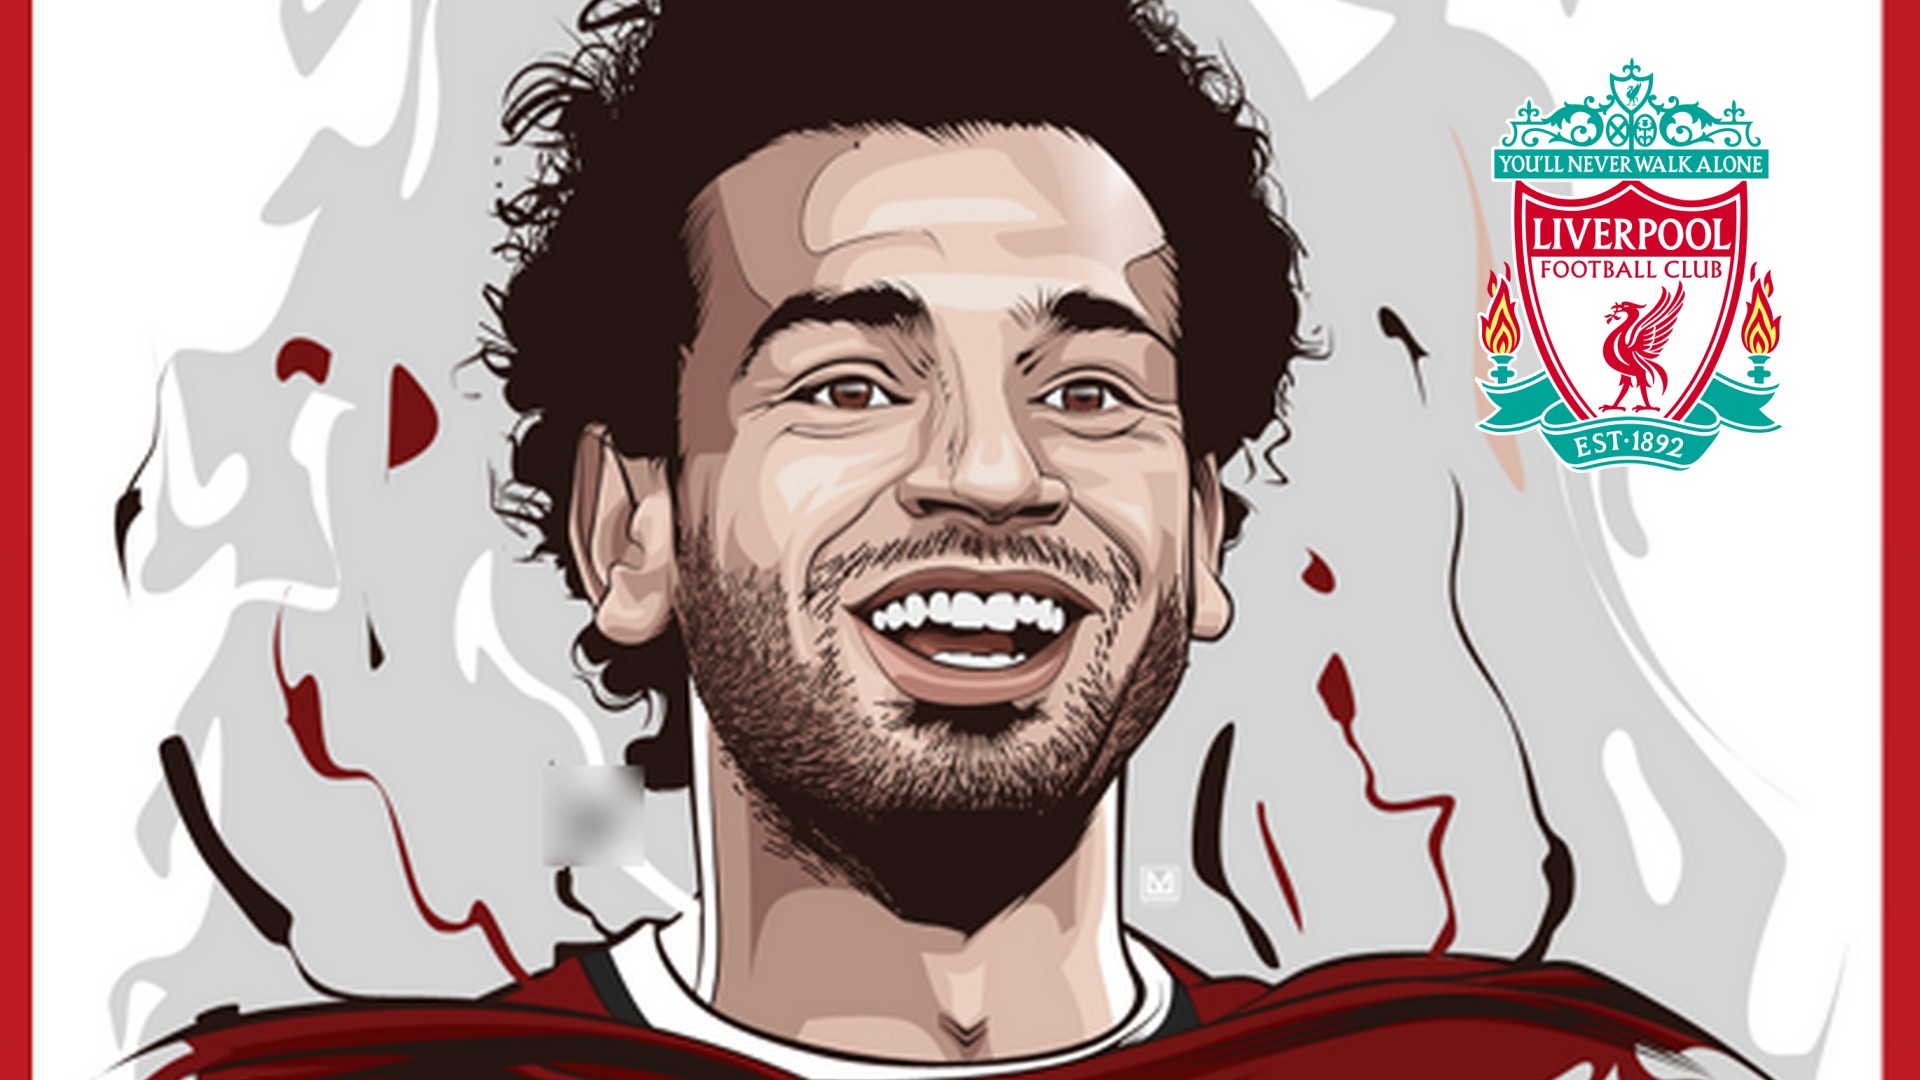 Desktop Wallpaper Mohamed Salah Liverpool with image resolution 1920x1080 pixel. You can use this wallpaper as background for your desktop Computer Screensavers, Android or iPhone smartphones